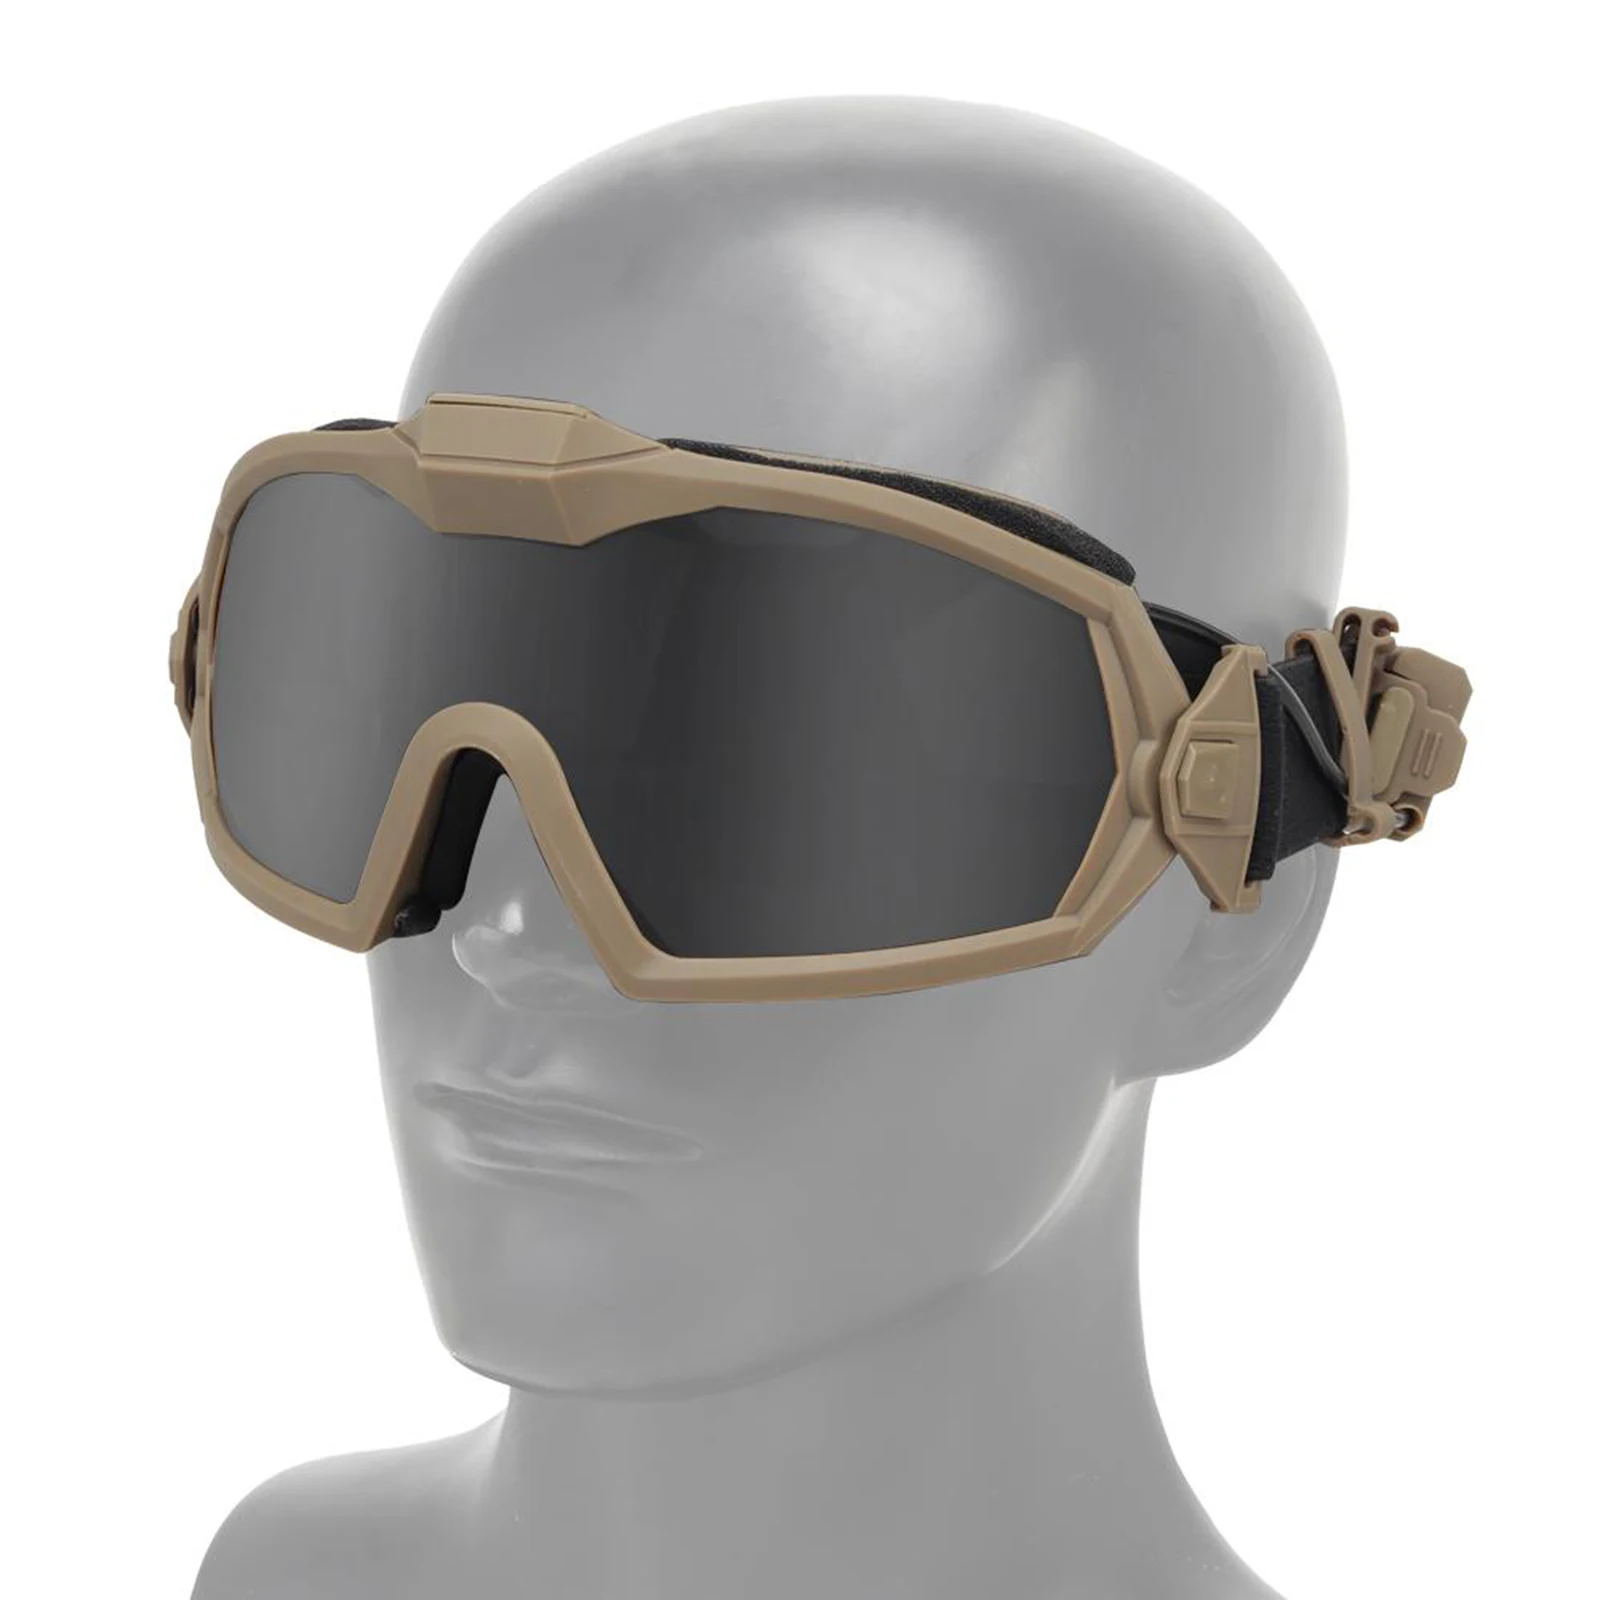 Anti-Fog Hunting Goggles with Fan, Racing Cycling Skiing Outdoor Glasses UV